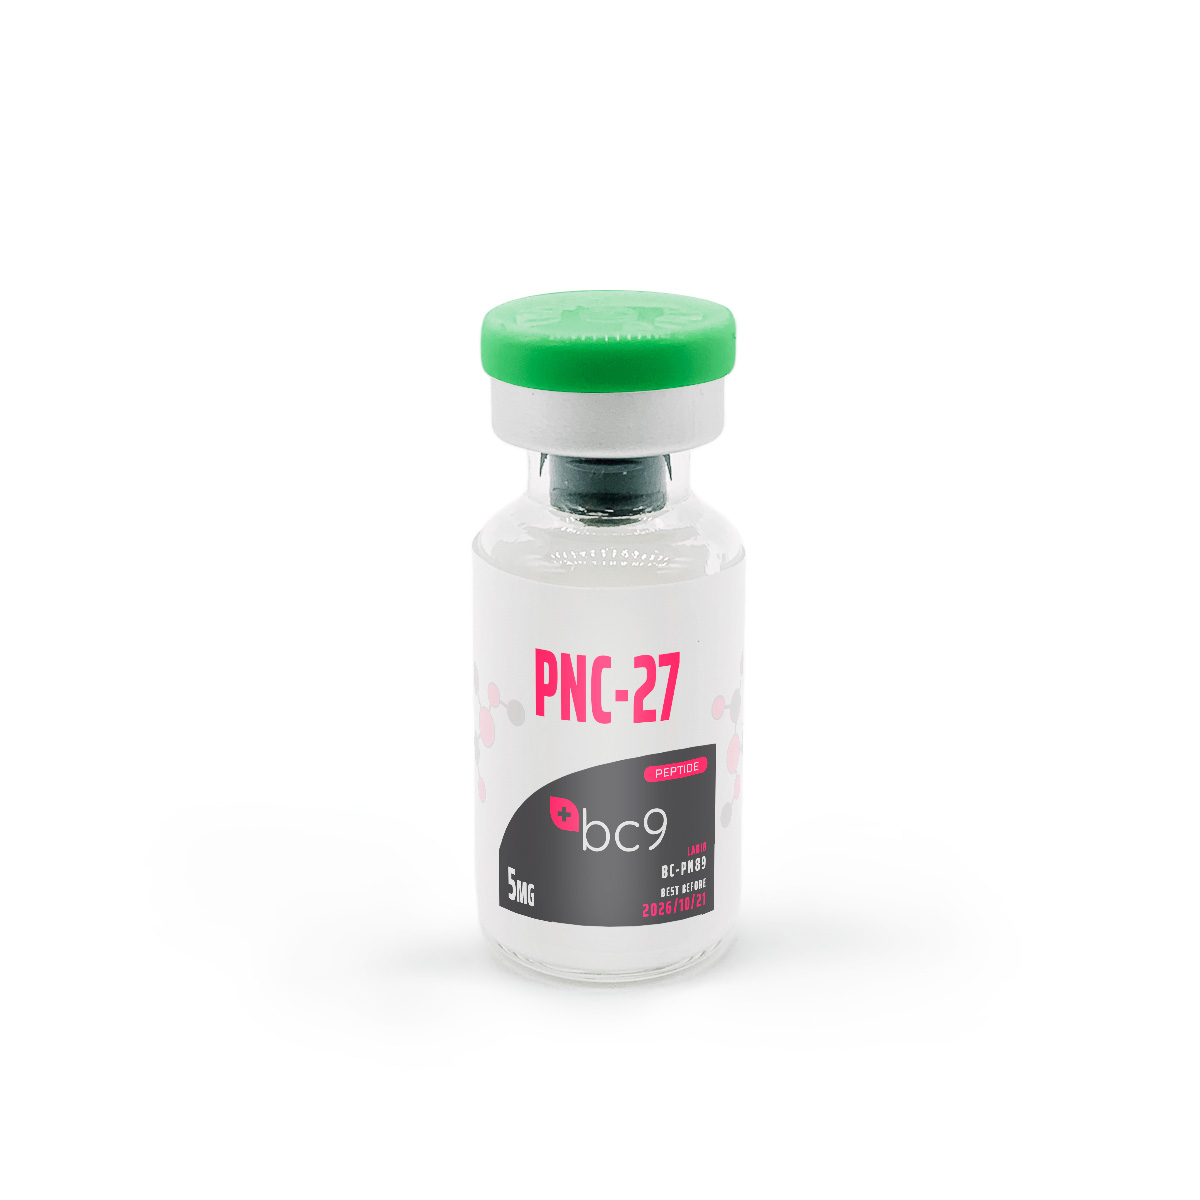 PNC-27 Peptide for Sale | Fast Shipping | BC9.org